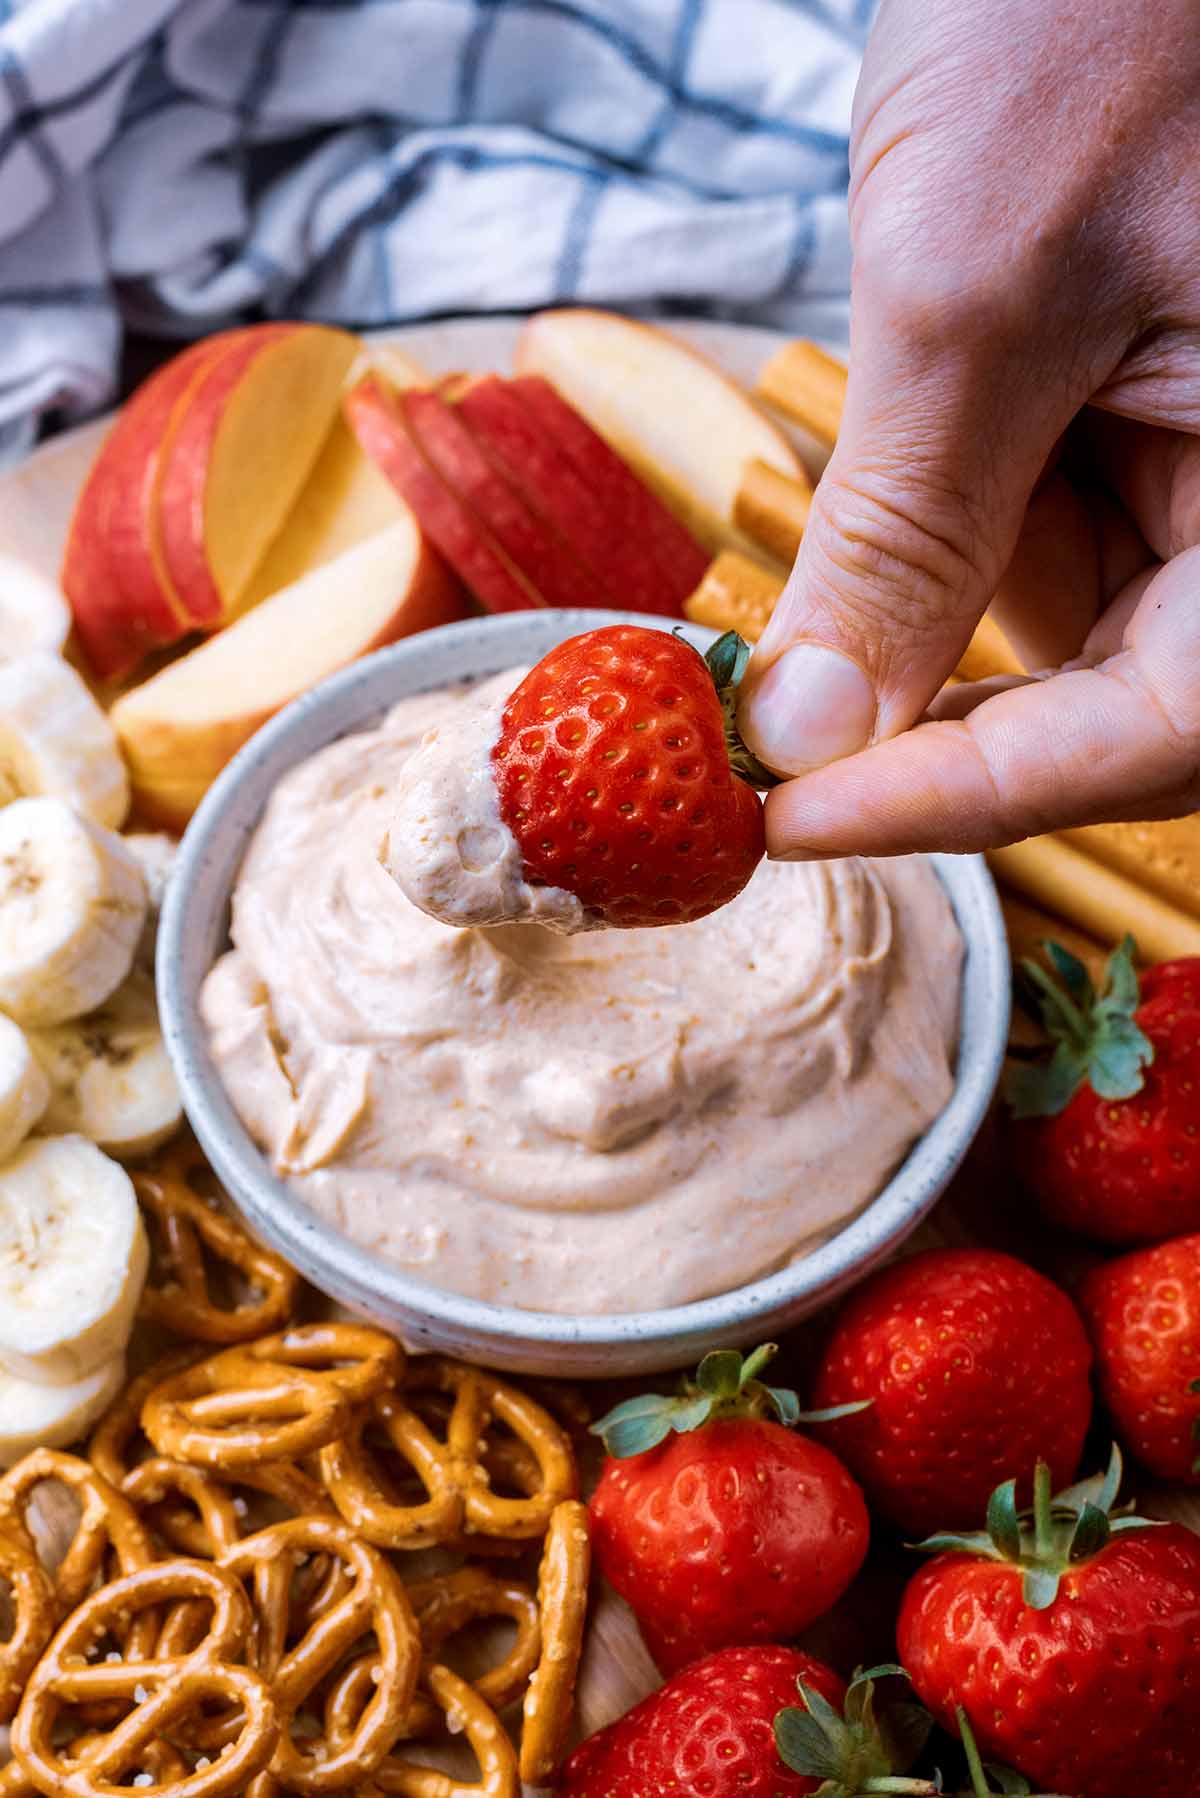 A hand dipping a strawberry into a yogurt dip.